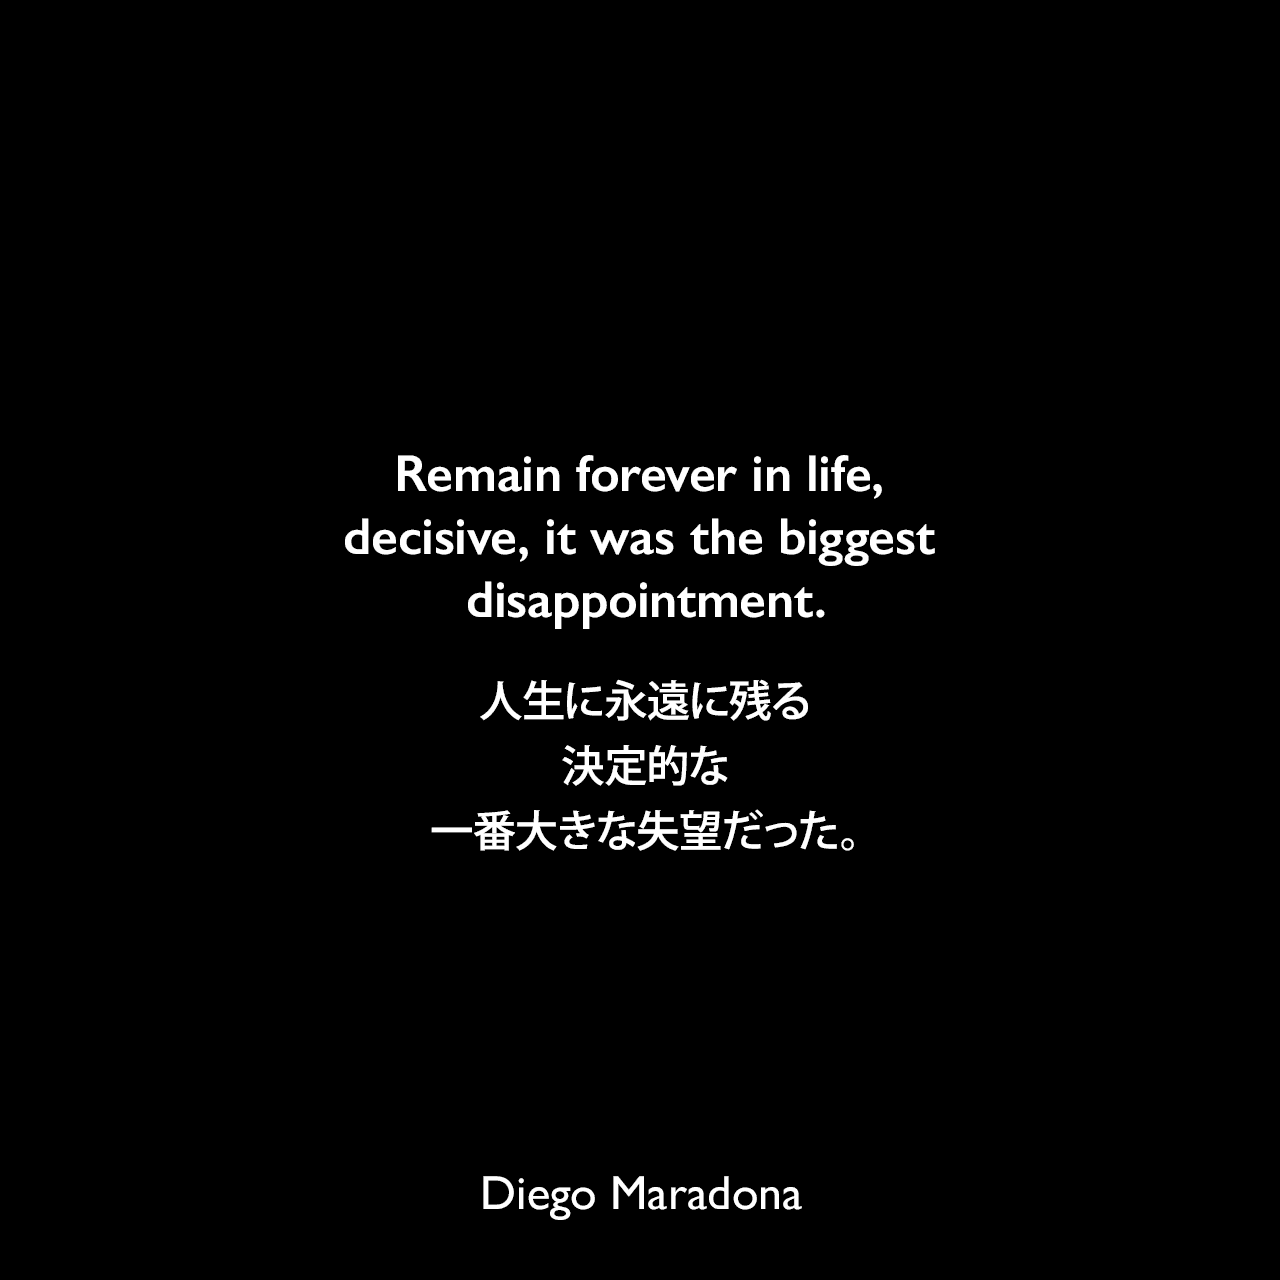 Remain forever in life, decisive, it was the biggest disappointment.人生に永遠に残る、決定的な、一番大きな失望だった。Diego Maradona